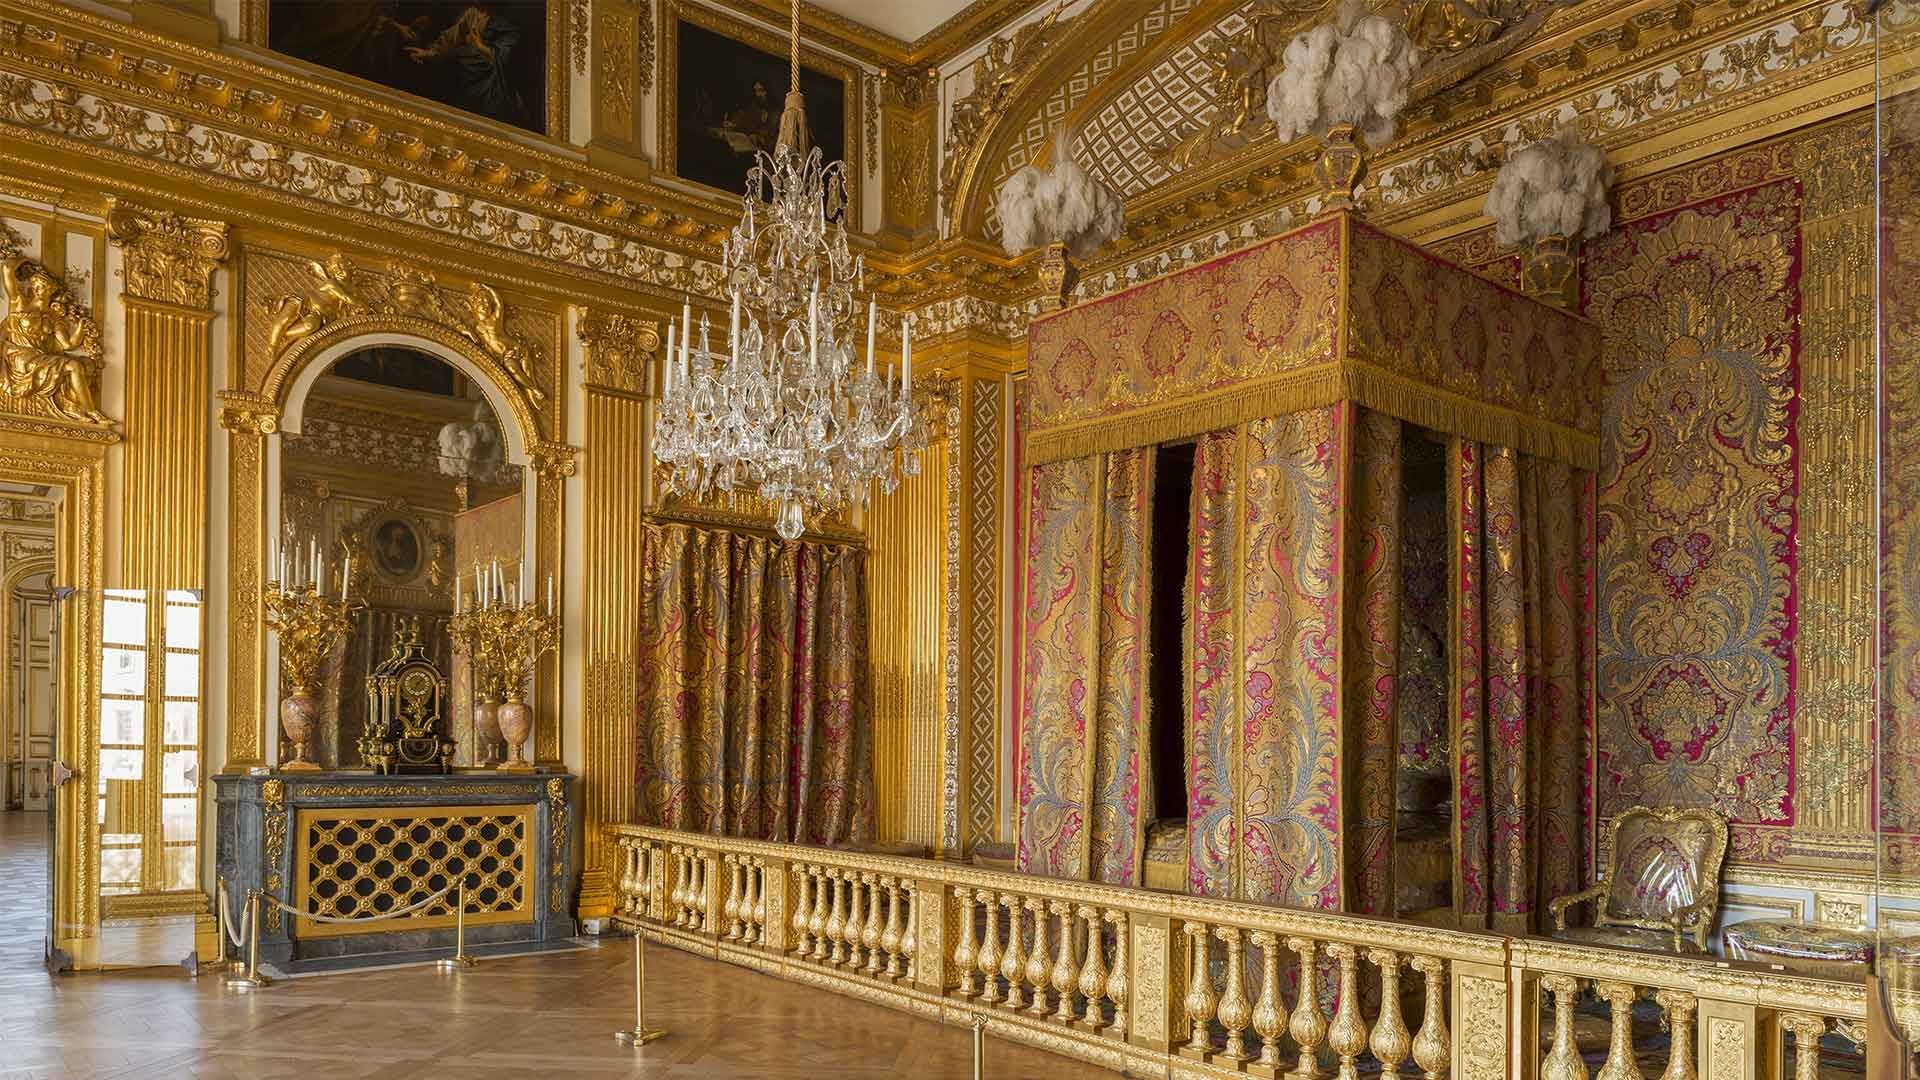 The King’s Chamber Inside The Palace Of Versailles